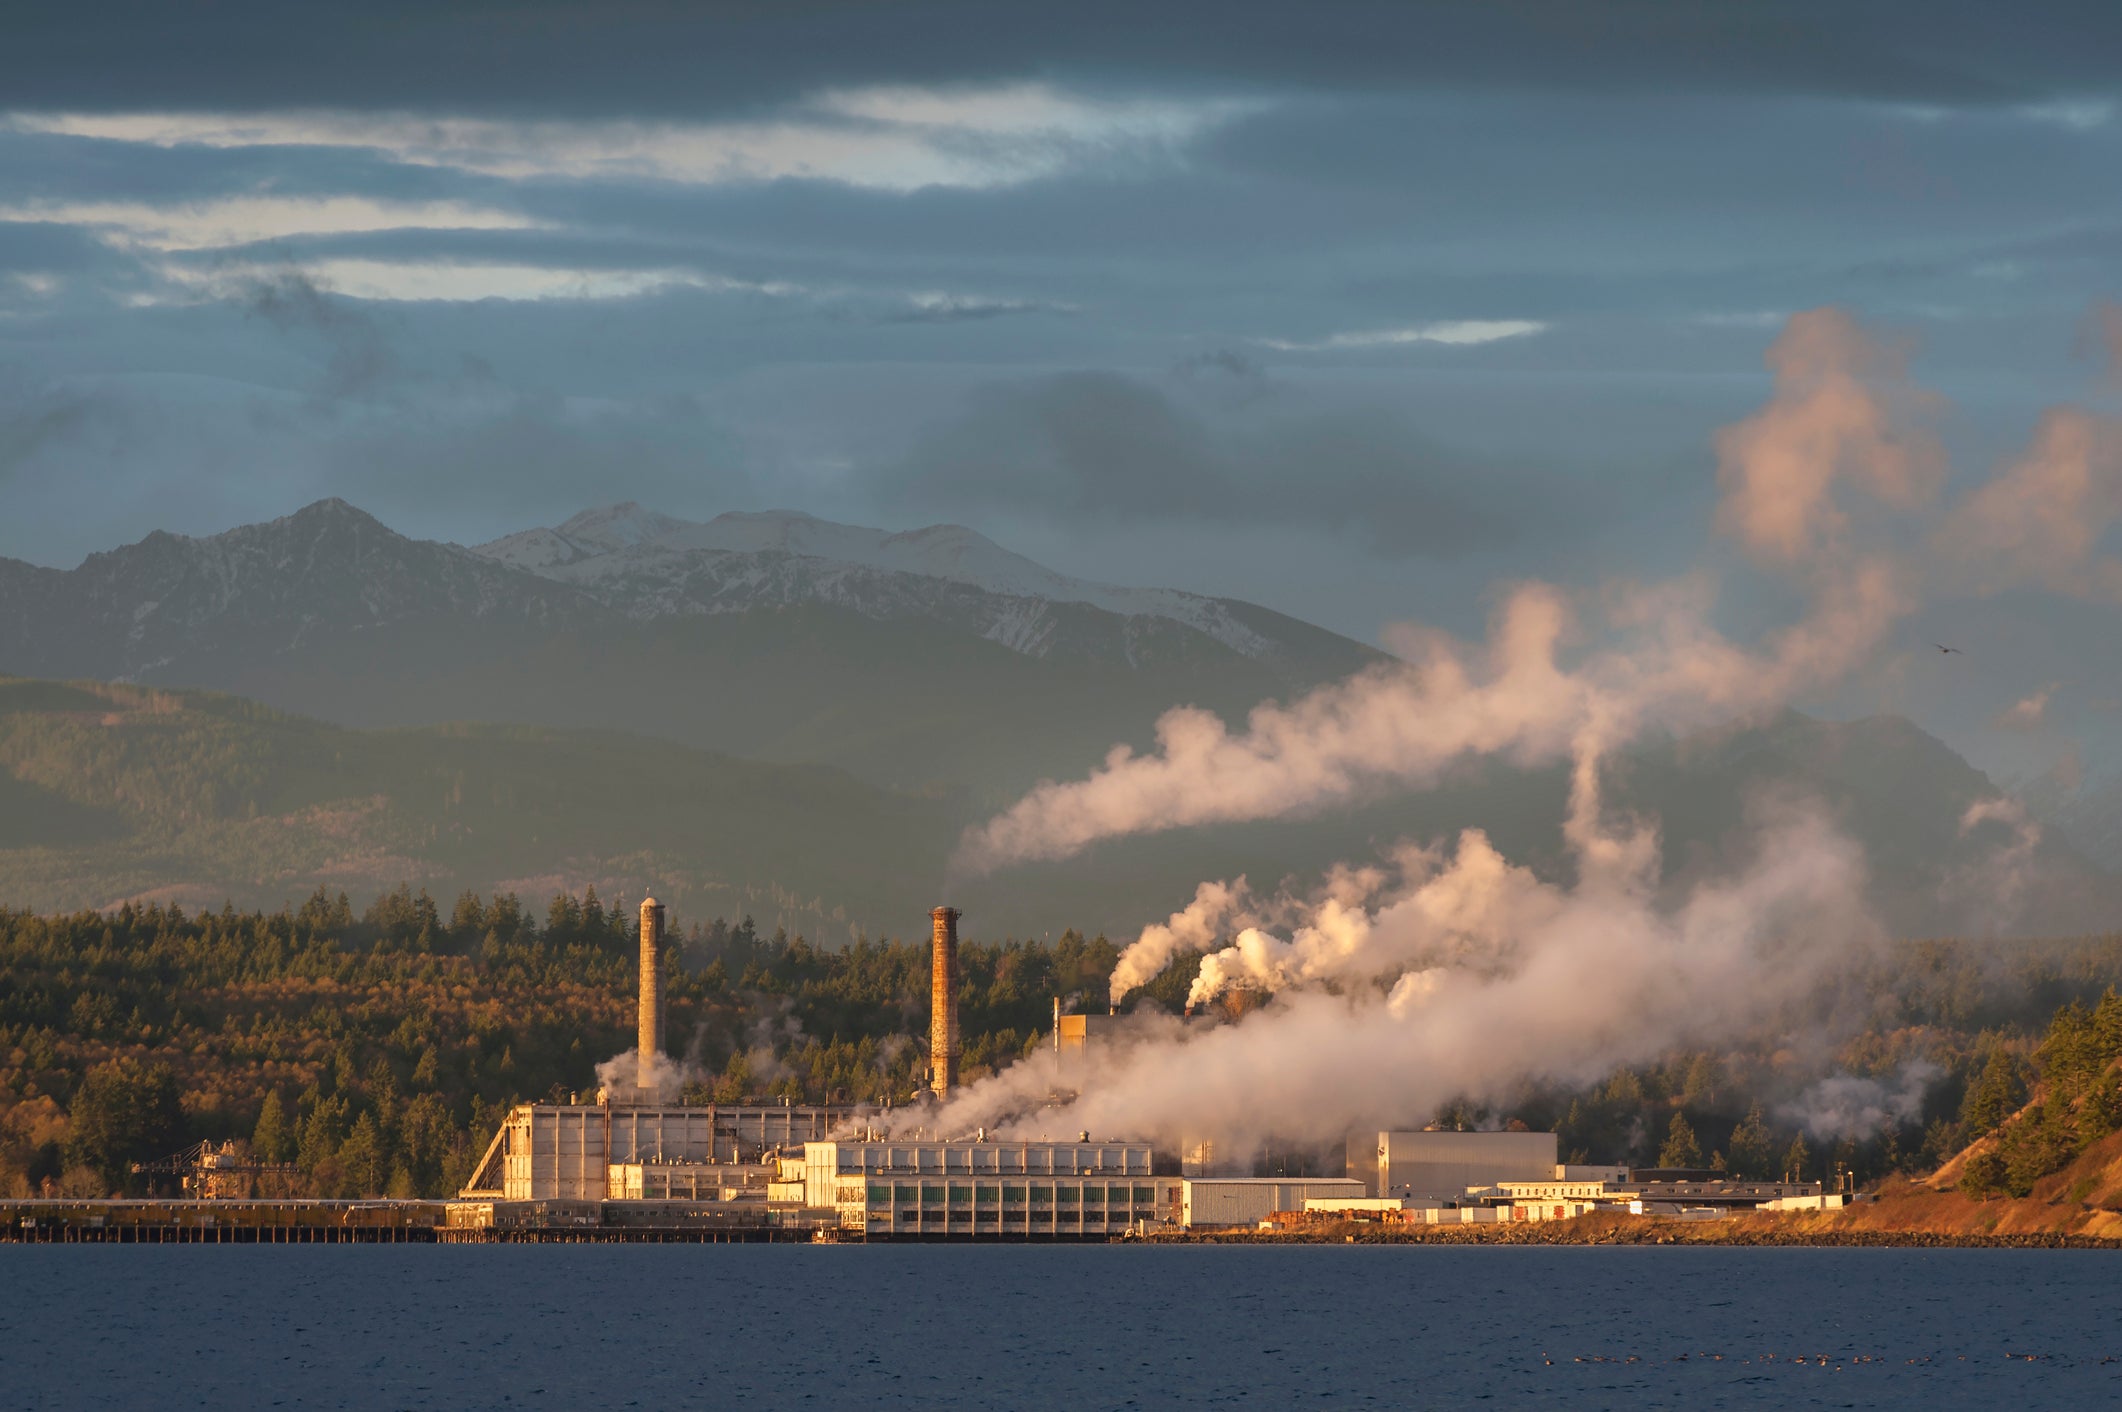 Industrial pulp mill in Port Townsend, Washington.
(Edmund Lowe Photography/Getty Images)